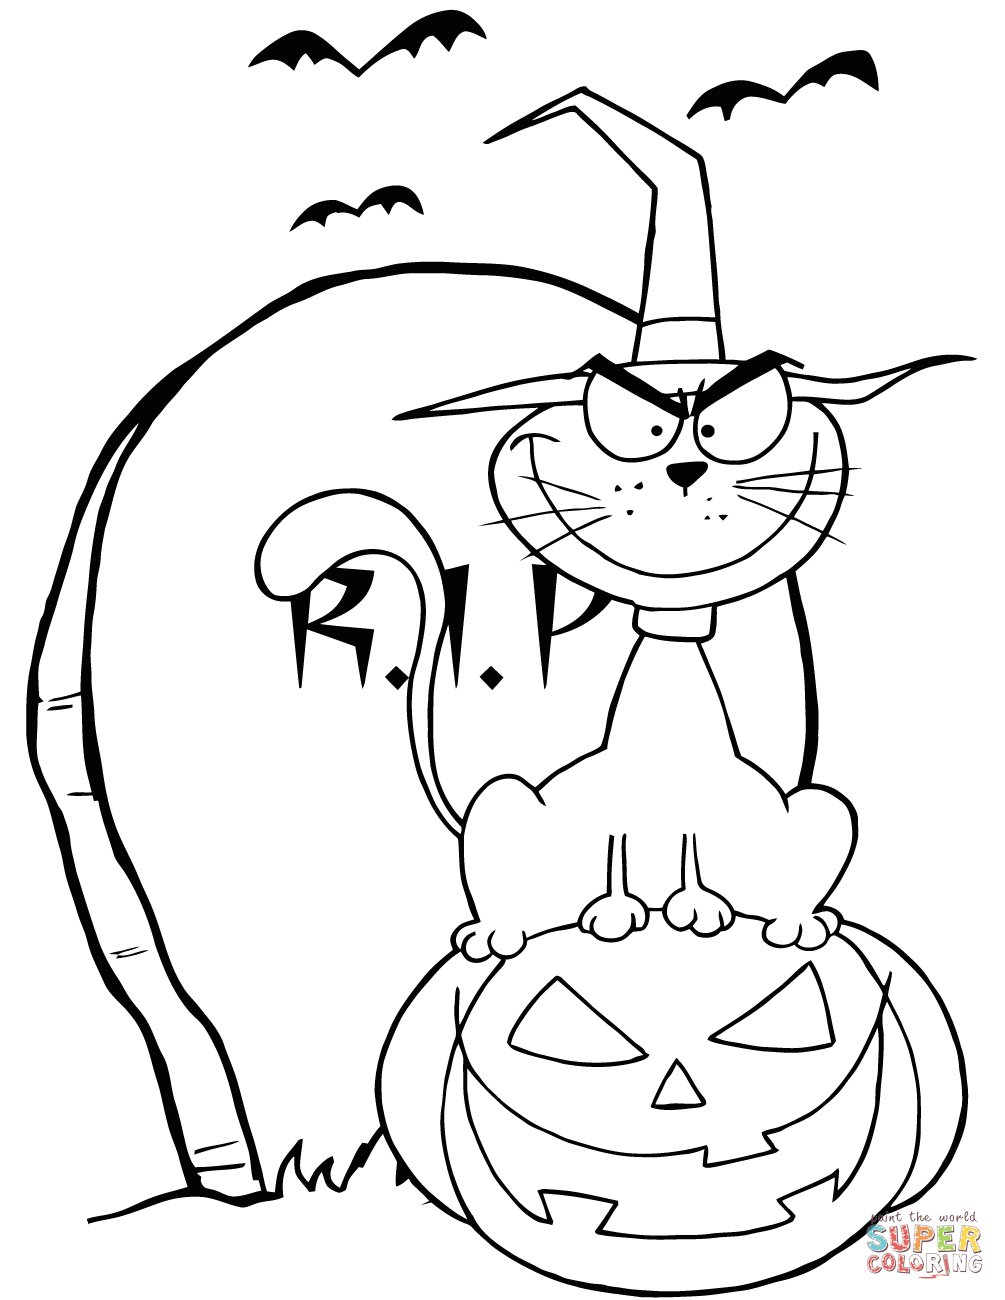 Halloween Cat on Pumpkin near Tombstone coloring page | Free ...